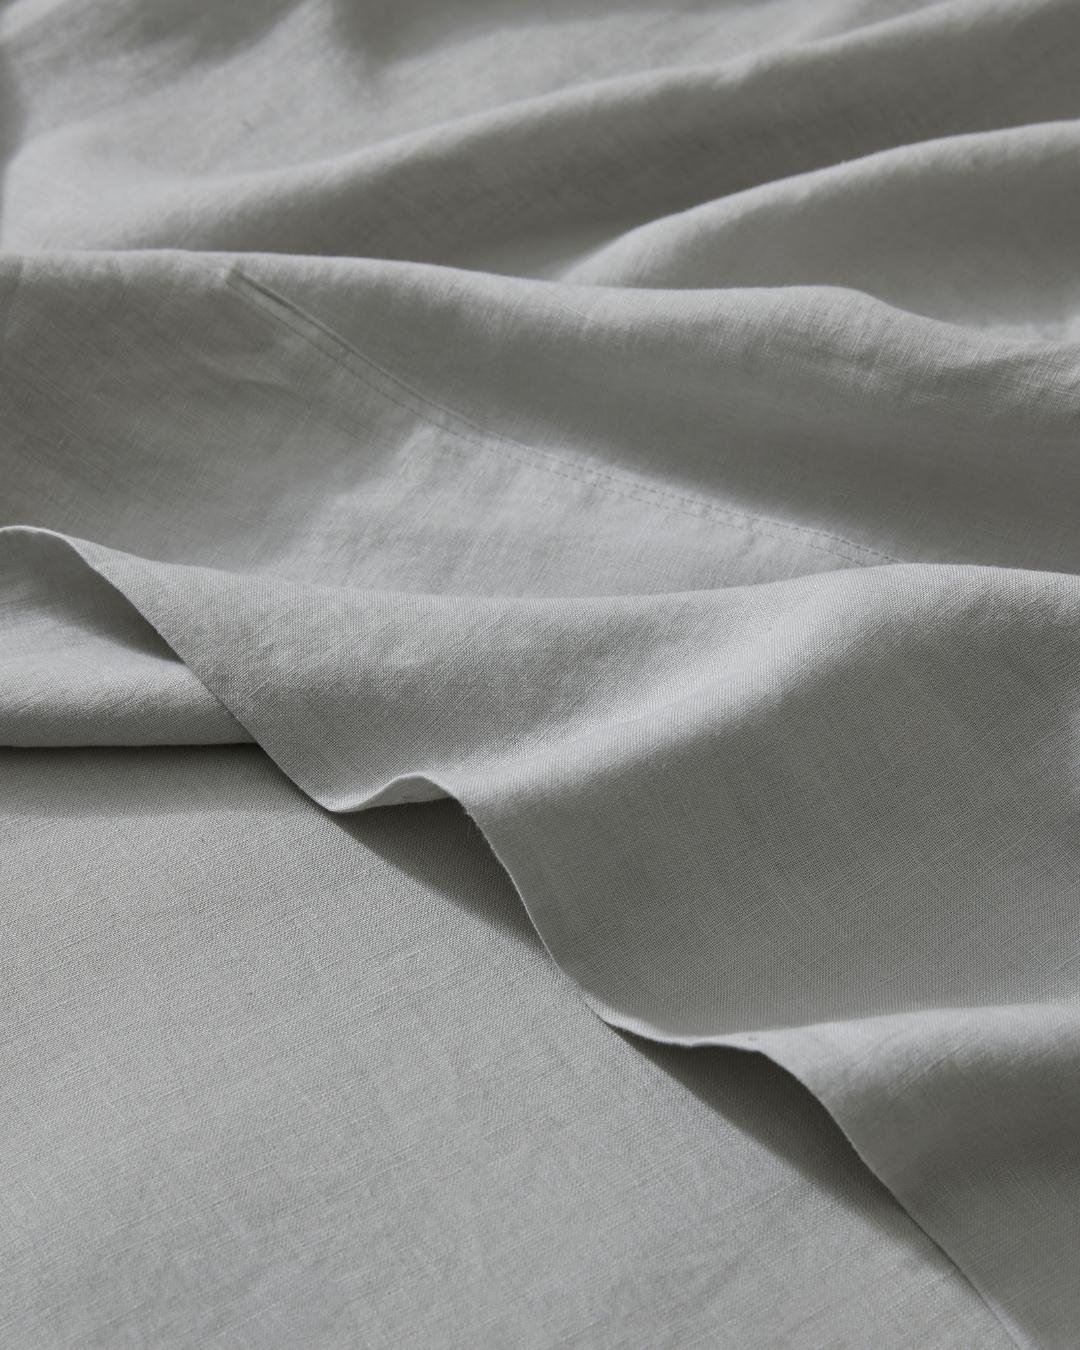 Crafted from the highest quality French Flax Linen. The Silver colourway is a cool, muted grey that will sit wonderfully in a neutral bedroom and pair effortlessly with white and onyx. 